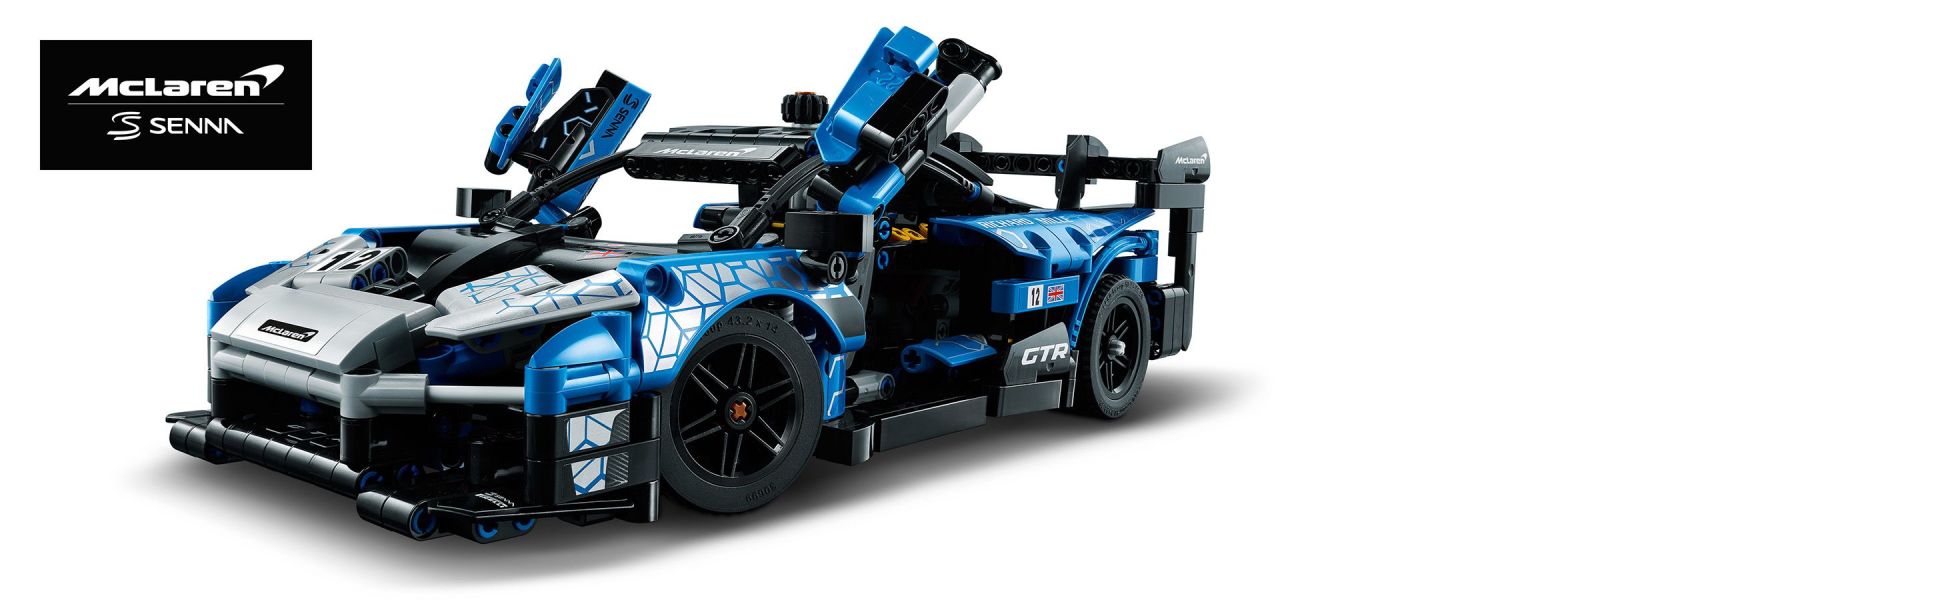  MYMG for Lego Technic McLaren Senna GTR 42123 Motor and Remote  Control Upgrade Kit, 2 Motors, App 4 Mode Control, Men's and Women's Toy  Gifts, Compatible with Lego 42123(Model not Included) 